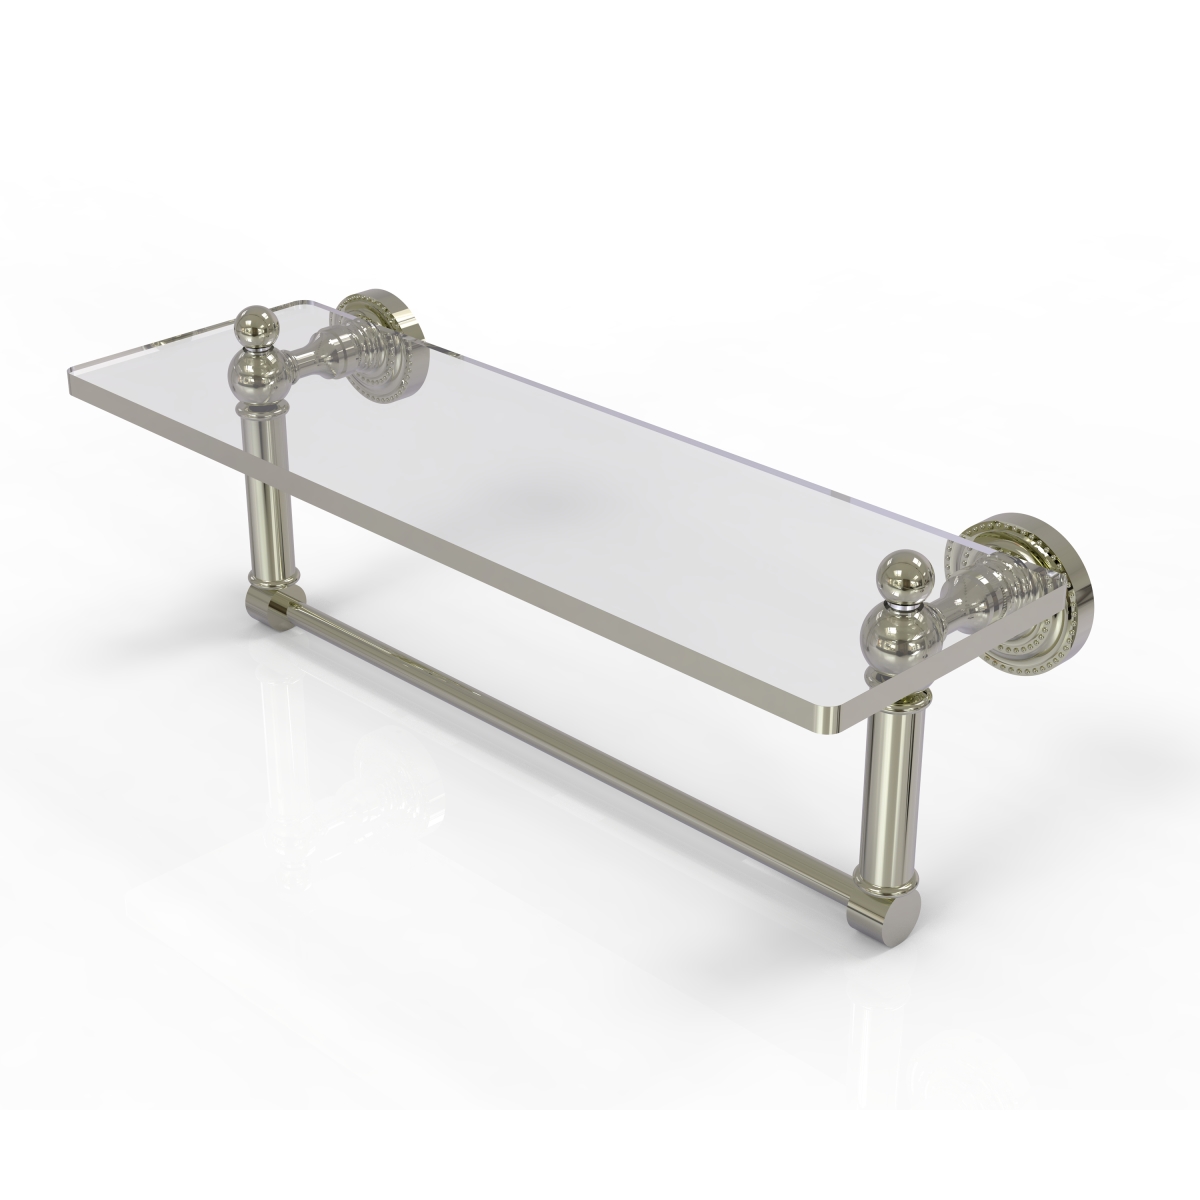 Picture of Allied Brass DT-1TB-16-PNI 16 in. Dottingham Glass Vanity Shelf with Integrated Towel Bar, Polished Nickel